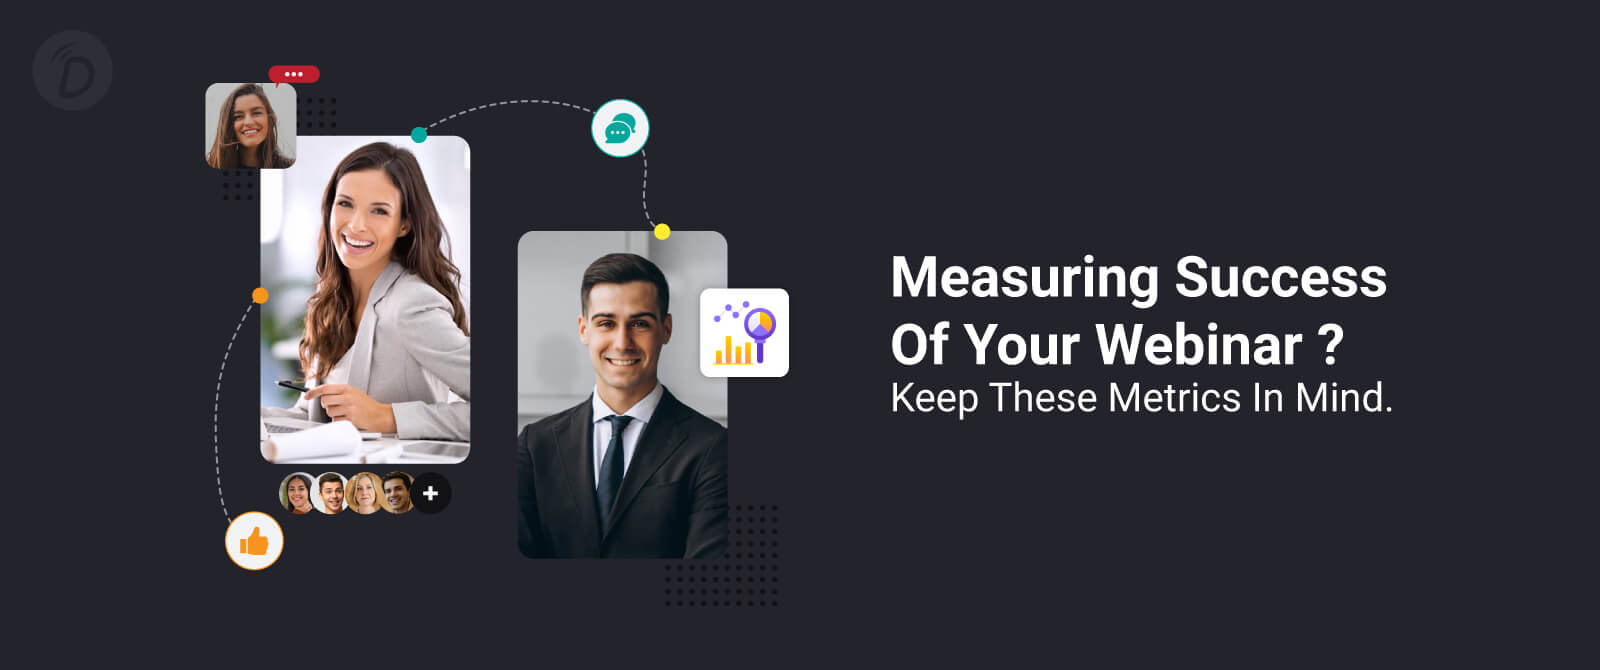 Measuring Success of Your Webinar? Keep These Metrics in Mind.